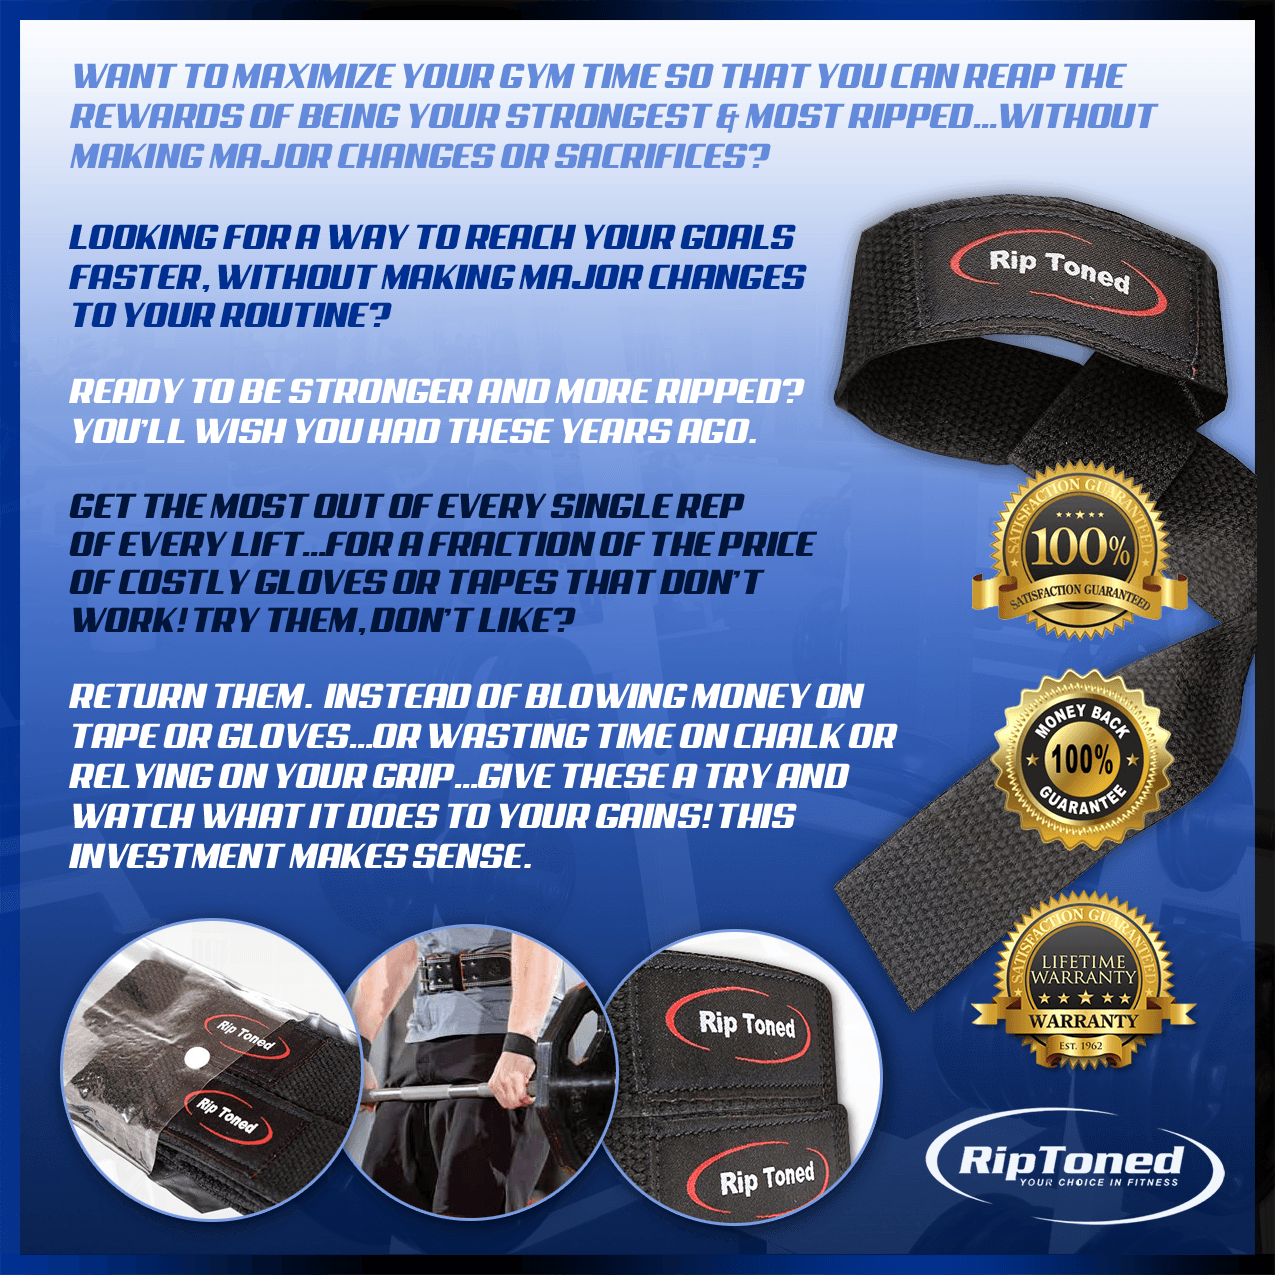 Get your gym bud lift heavier weights with you. 🤪 Gift him a new pair of Rip  Toned lifting straps! Take advantage of our December Special. …